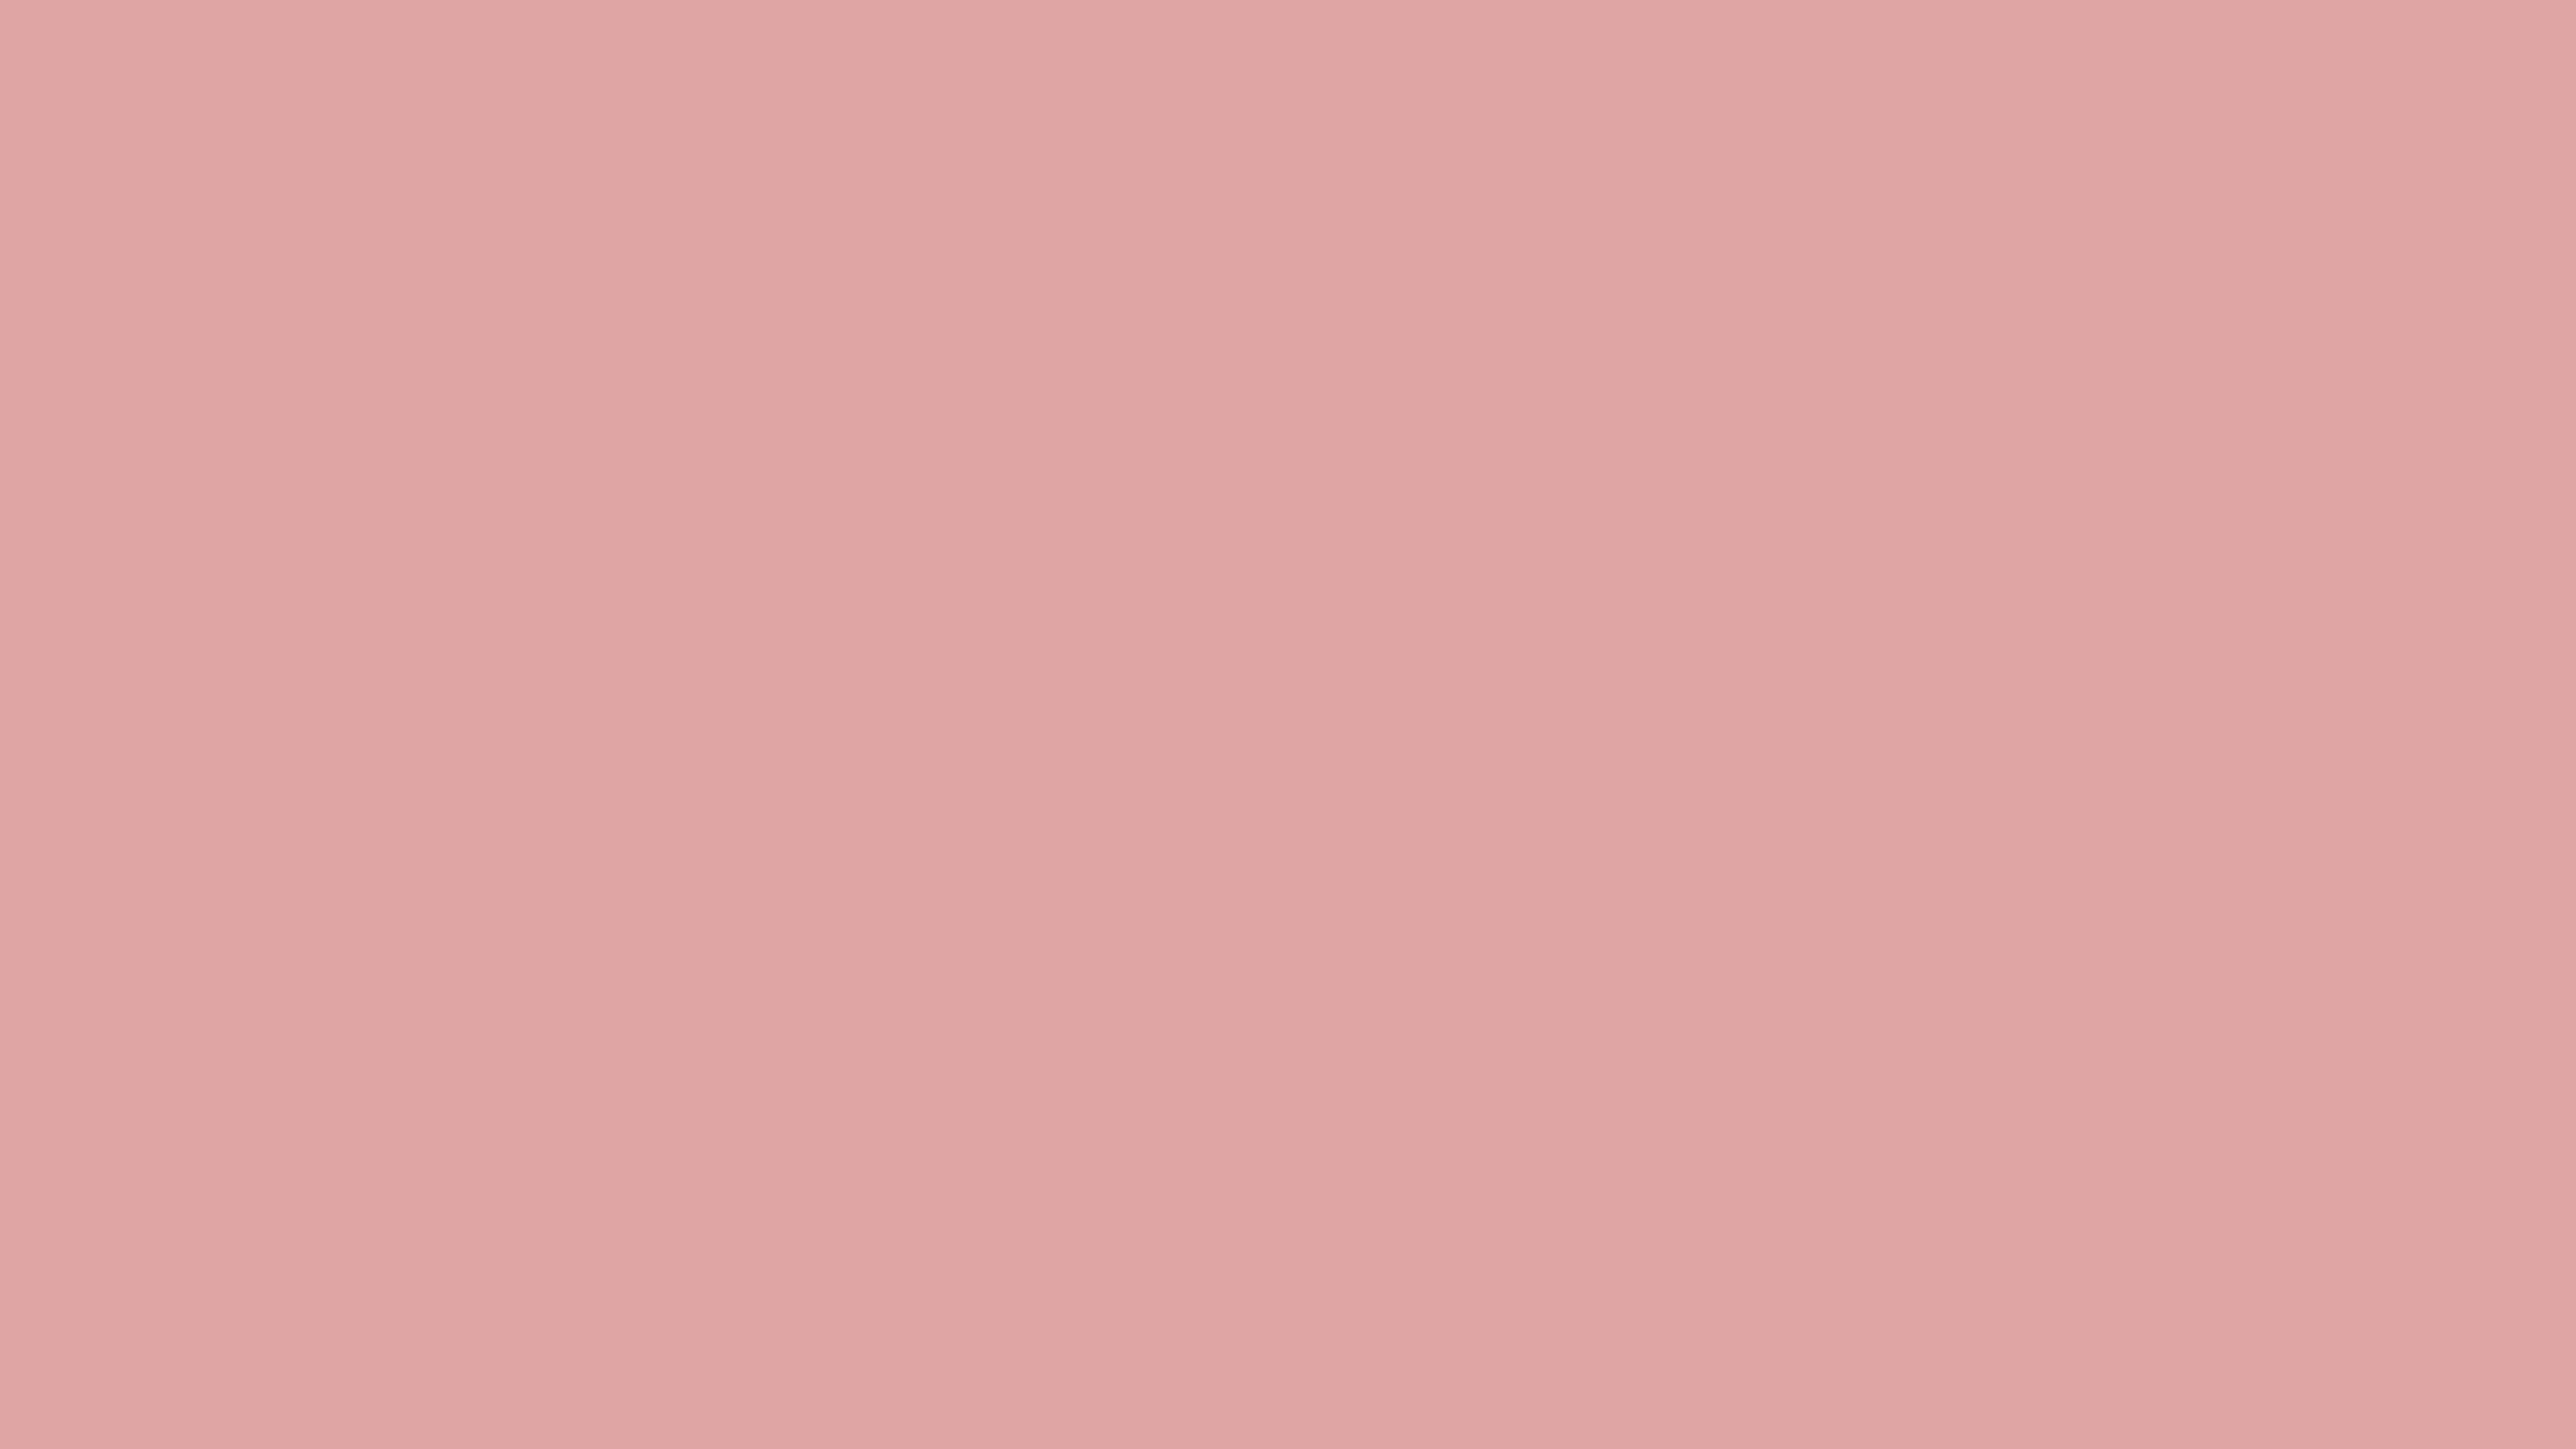 7680x4320 Pastel Pink Solid Color Background